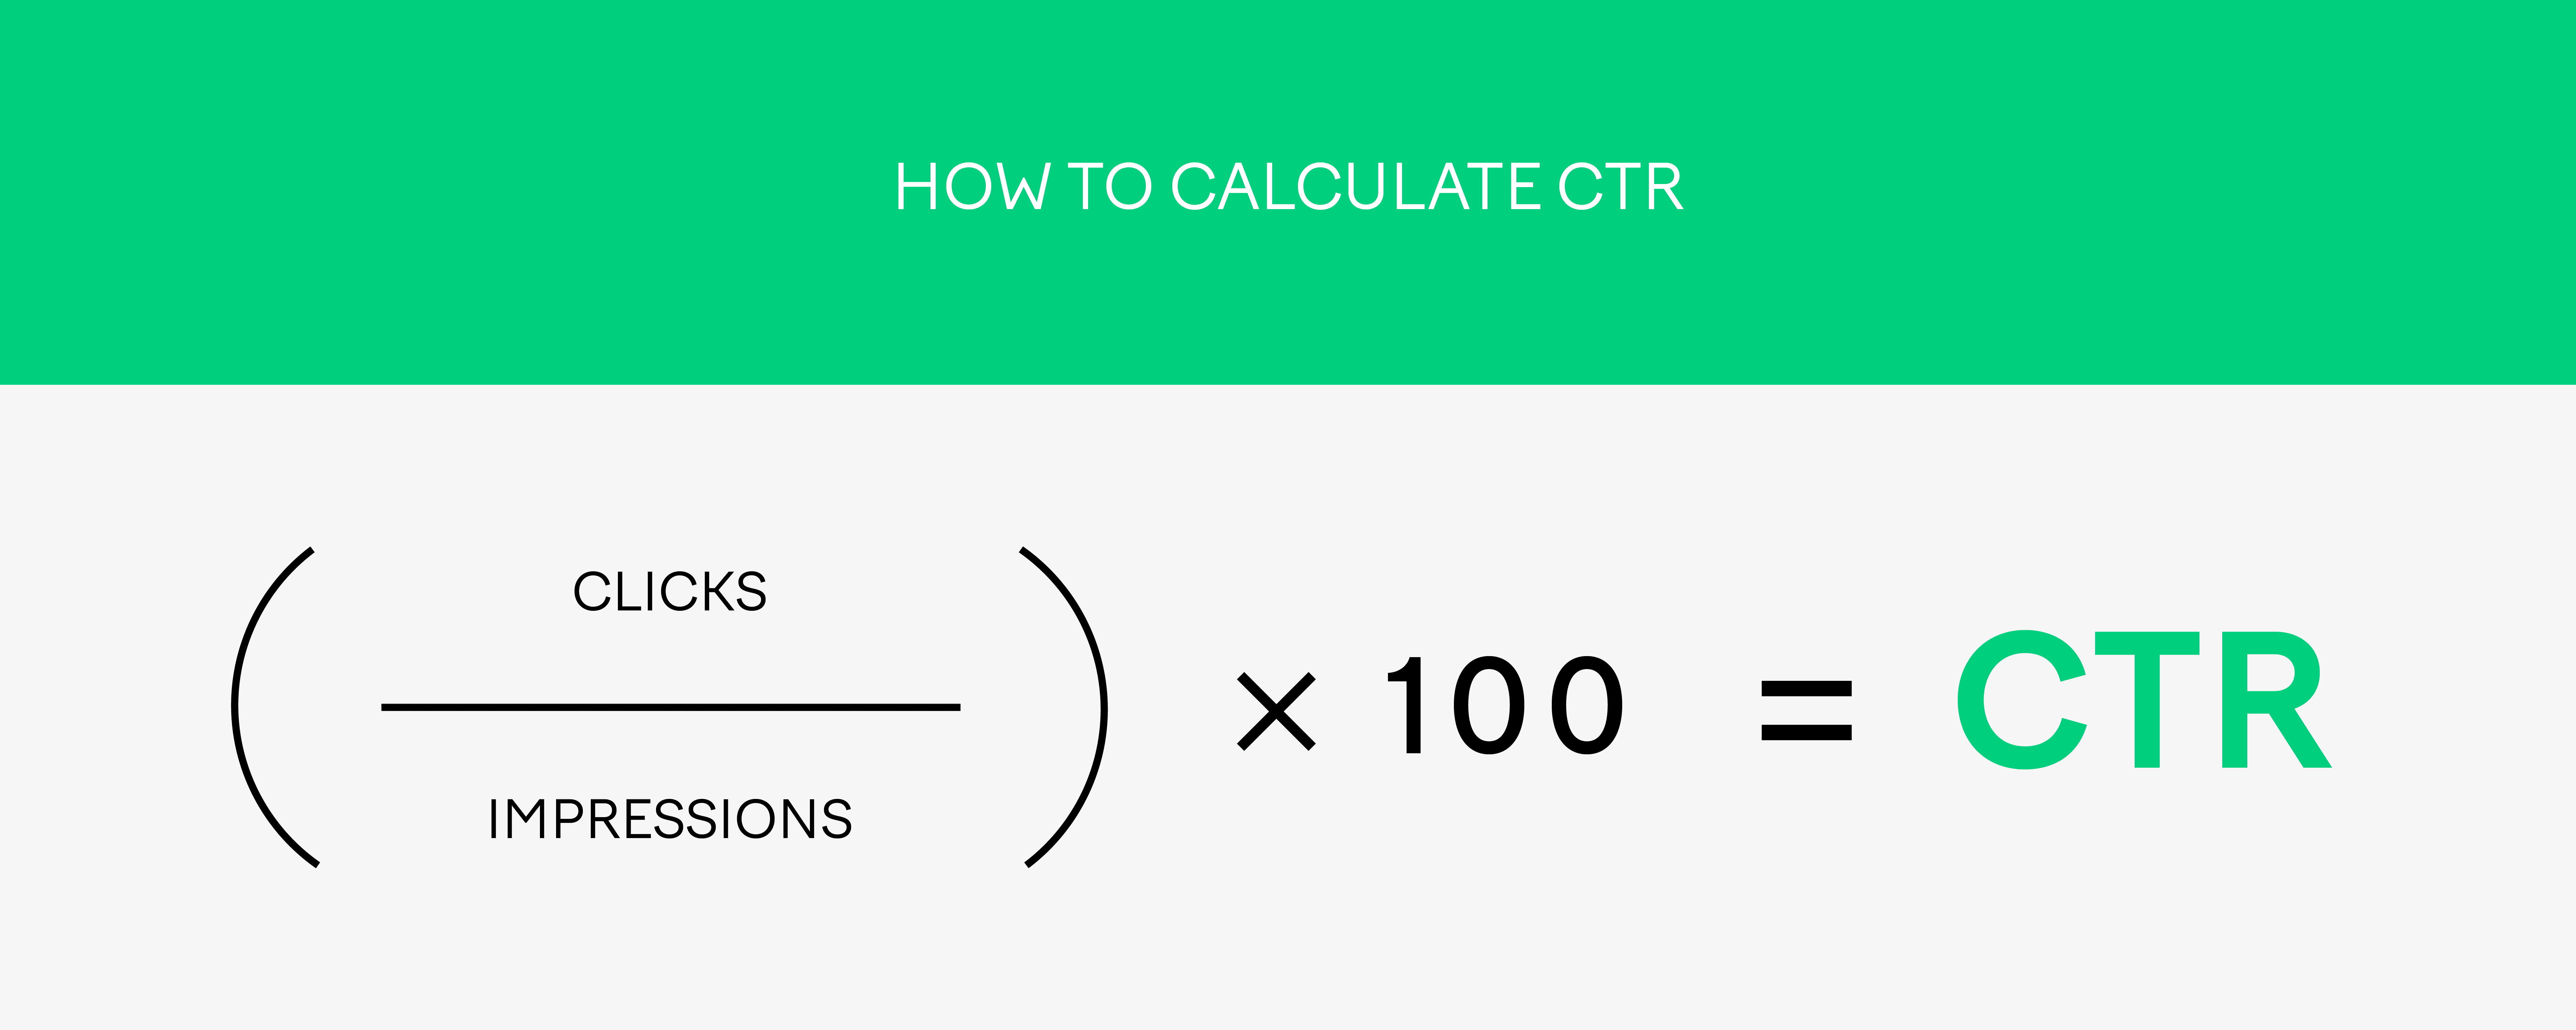 How to Calculate CTR